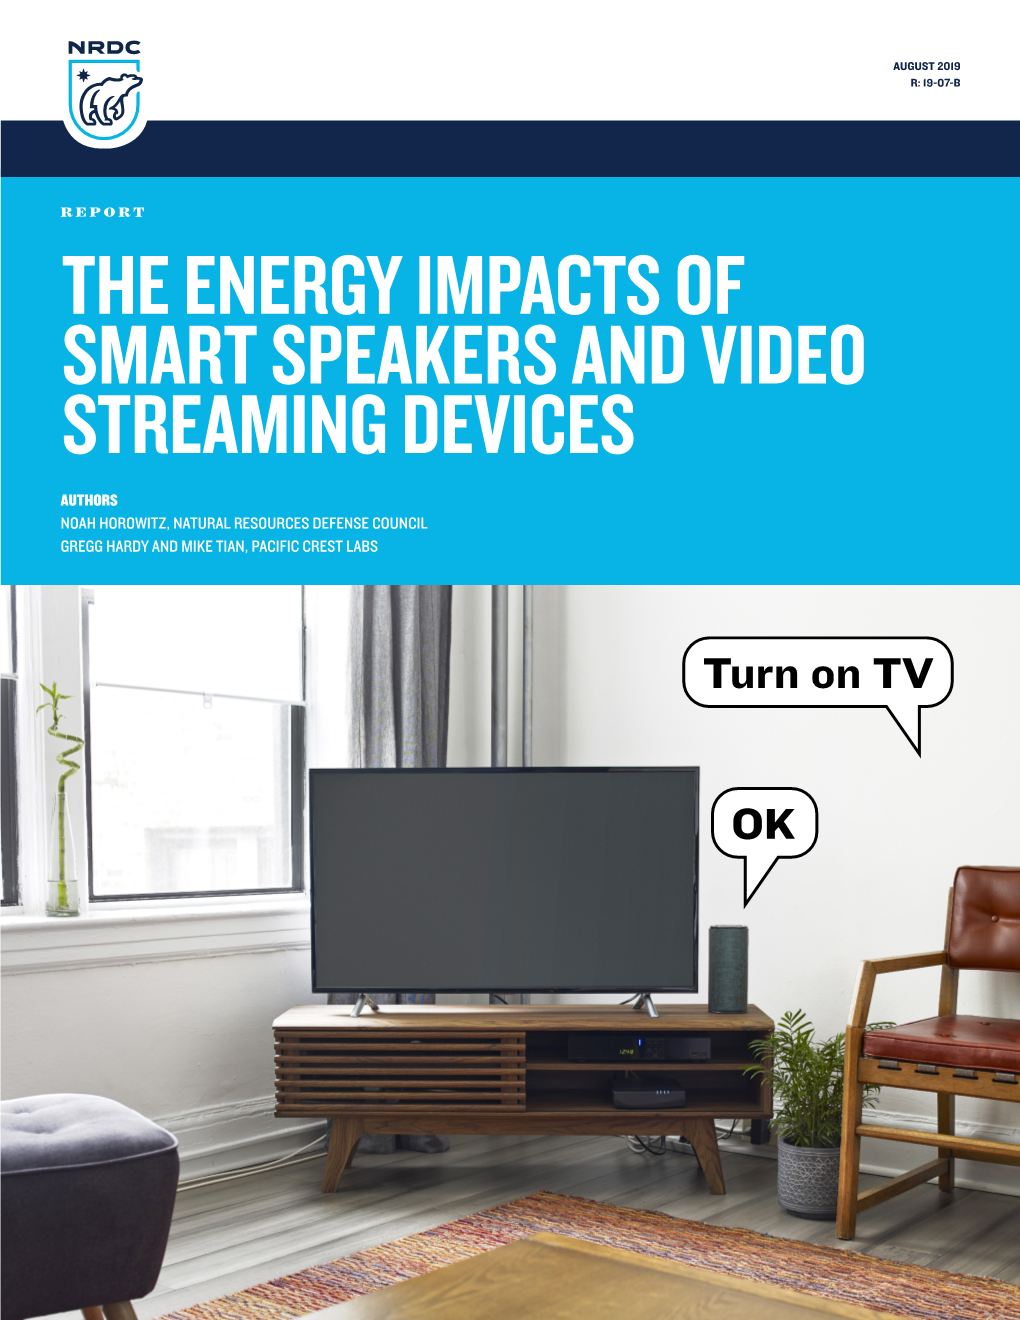 The Energy Impacts of Smart Speakers and Video Streaming Devices (PDF)